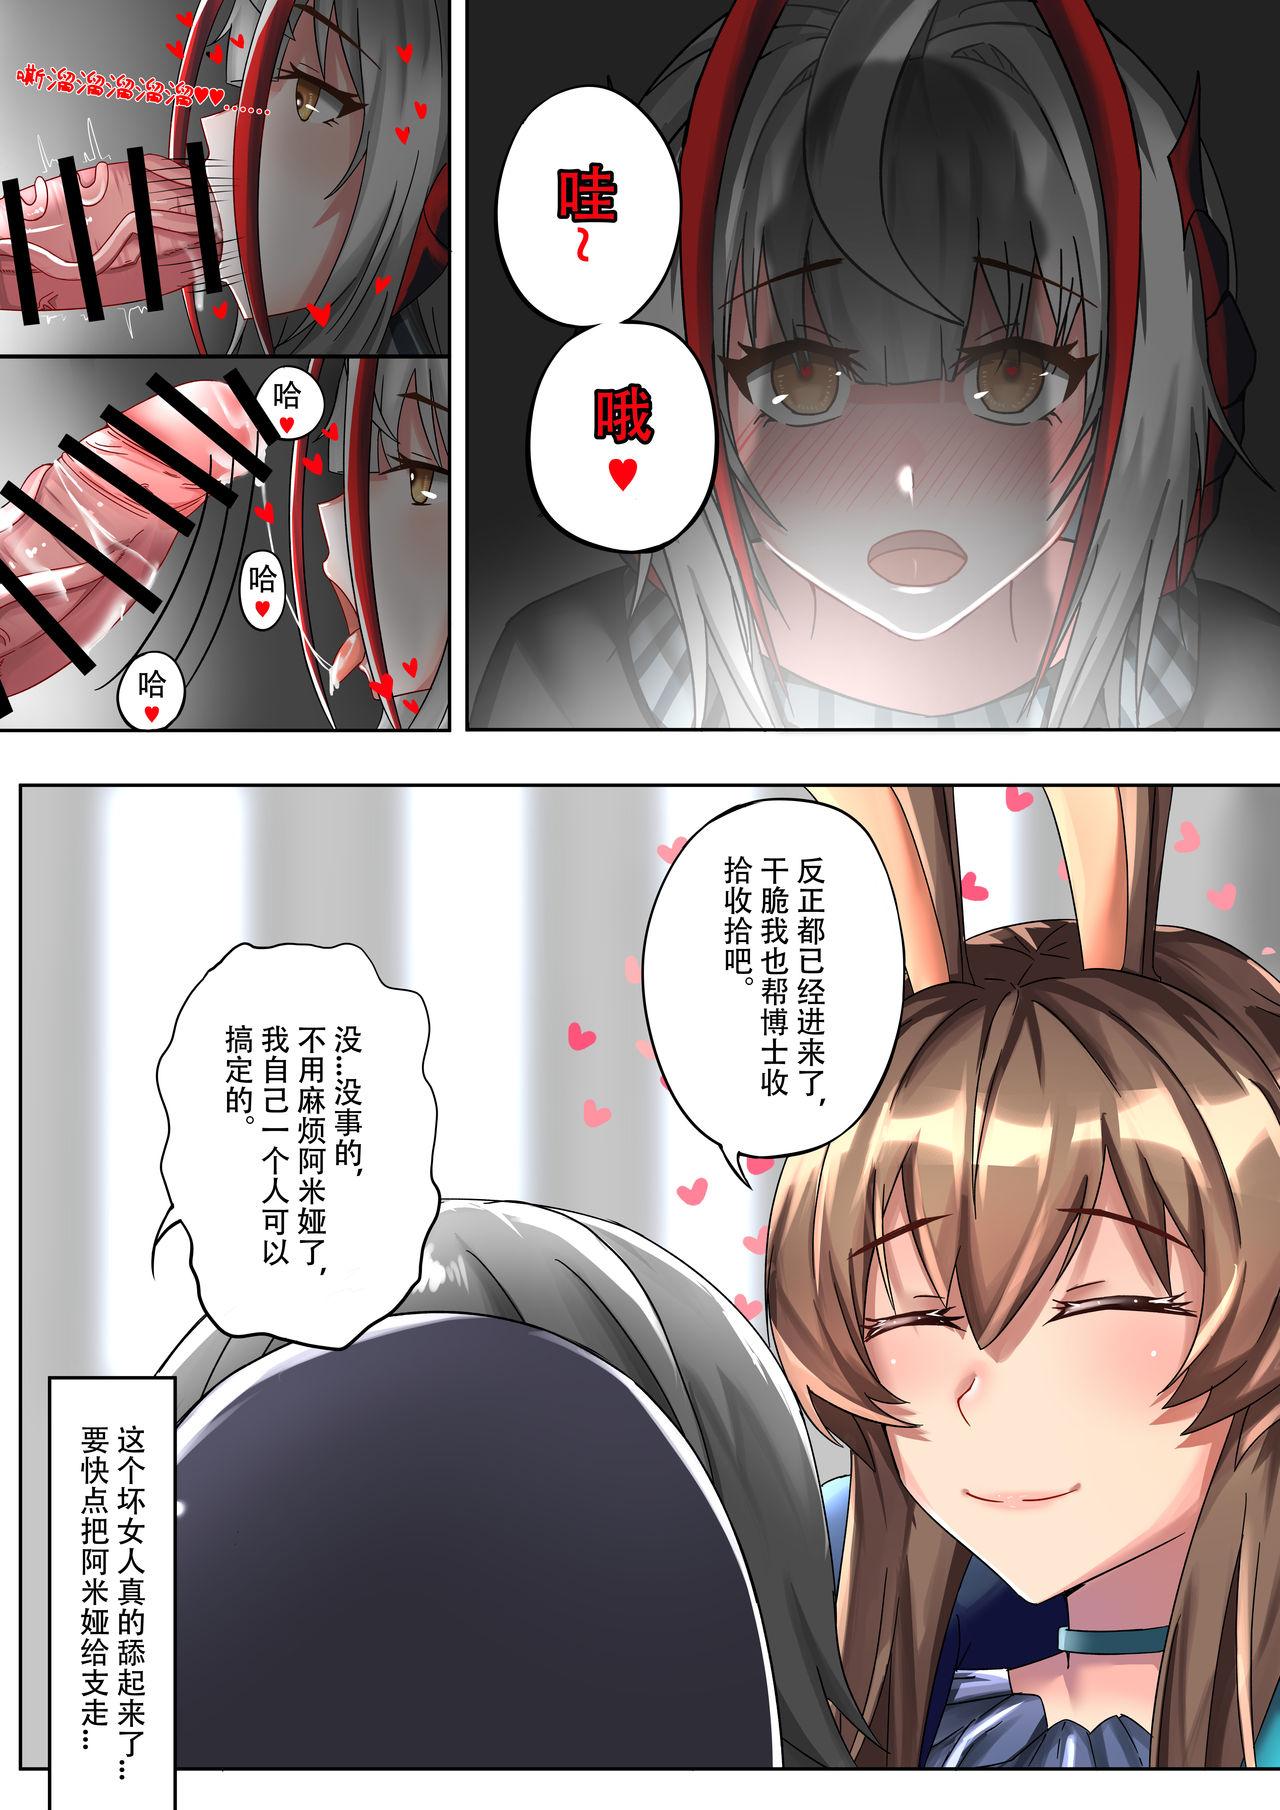 Old Vs Young 所恶之人亦为所爱之人 - Arknights French - Page 11